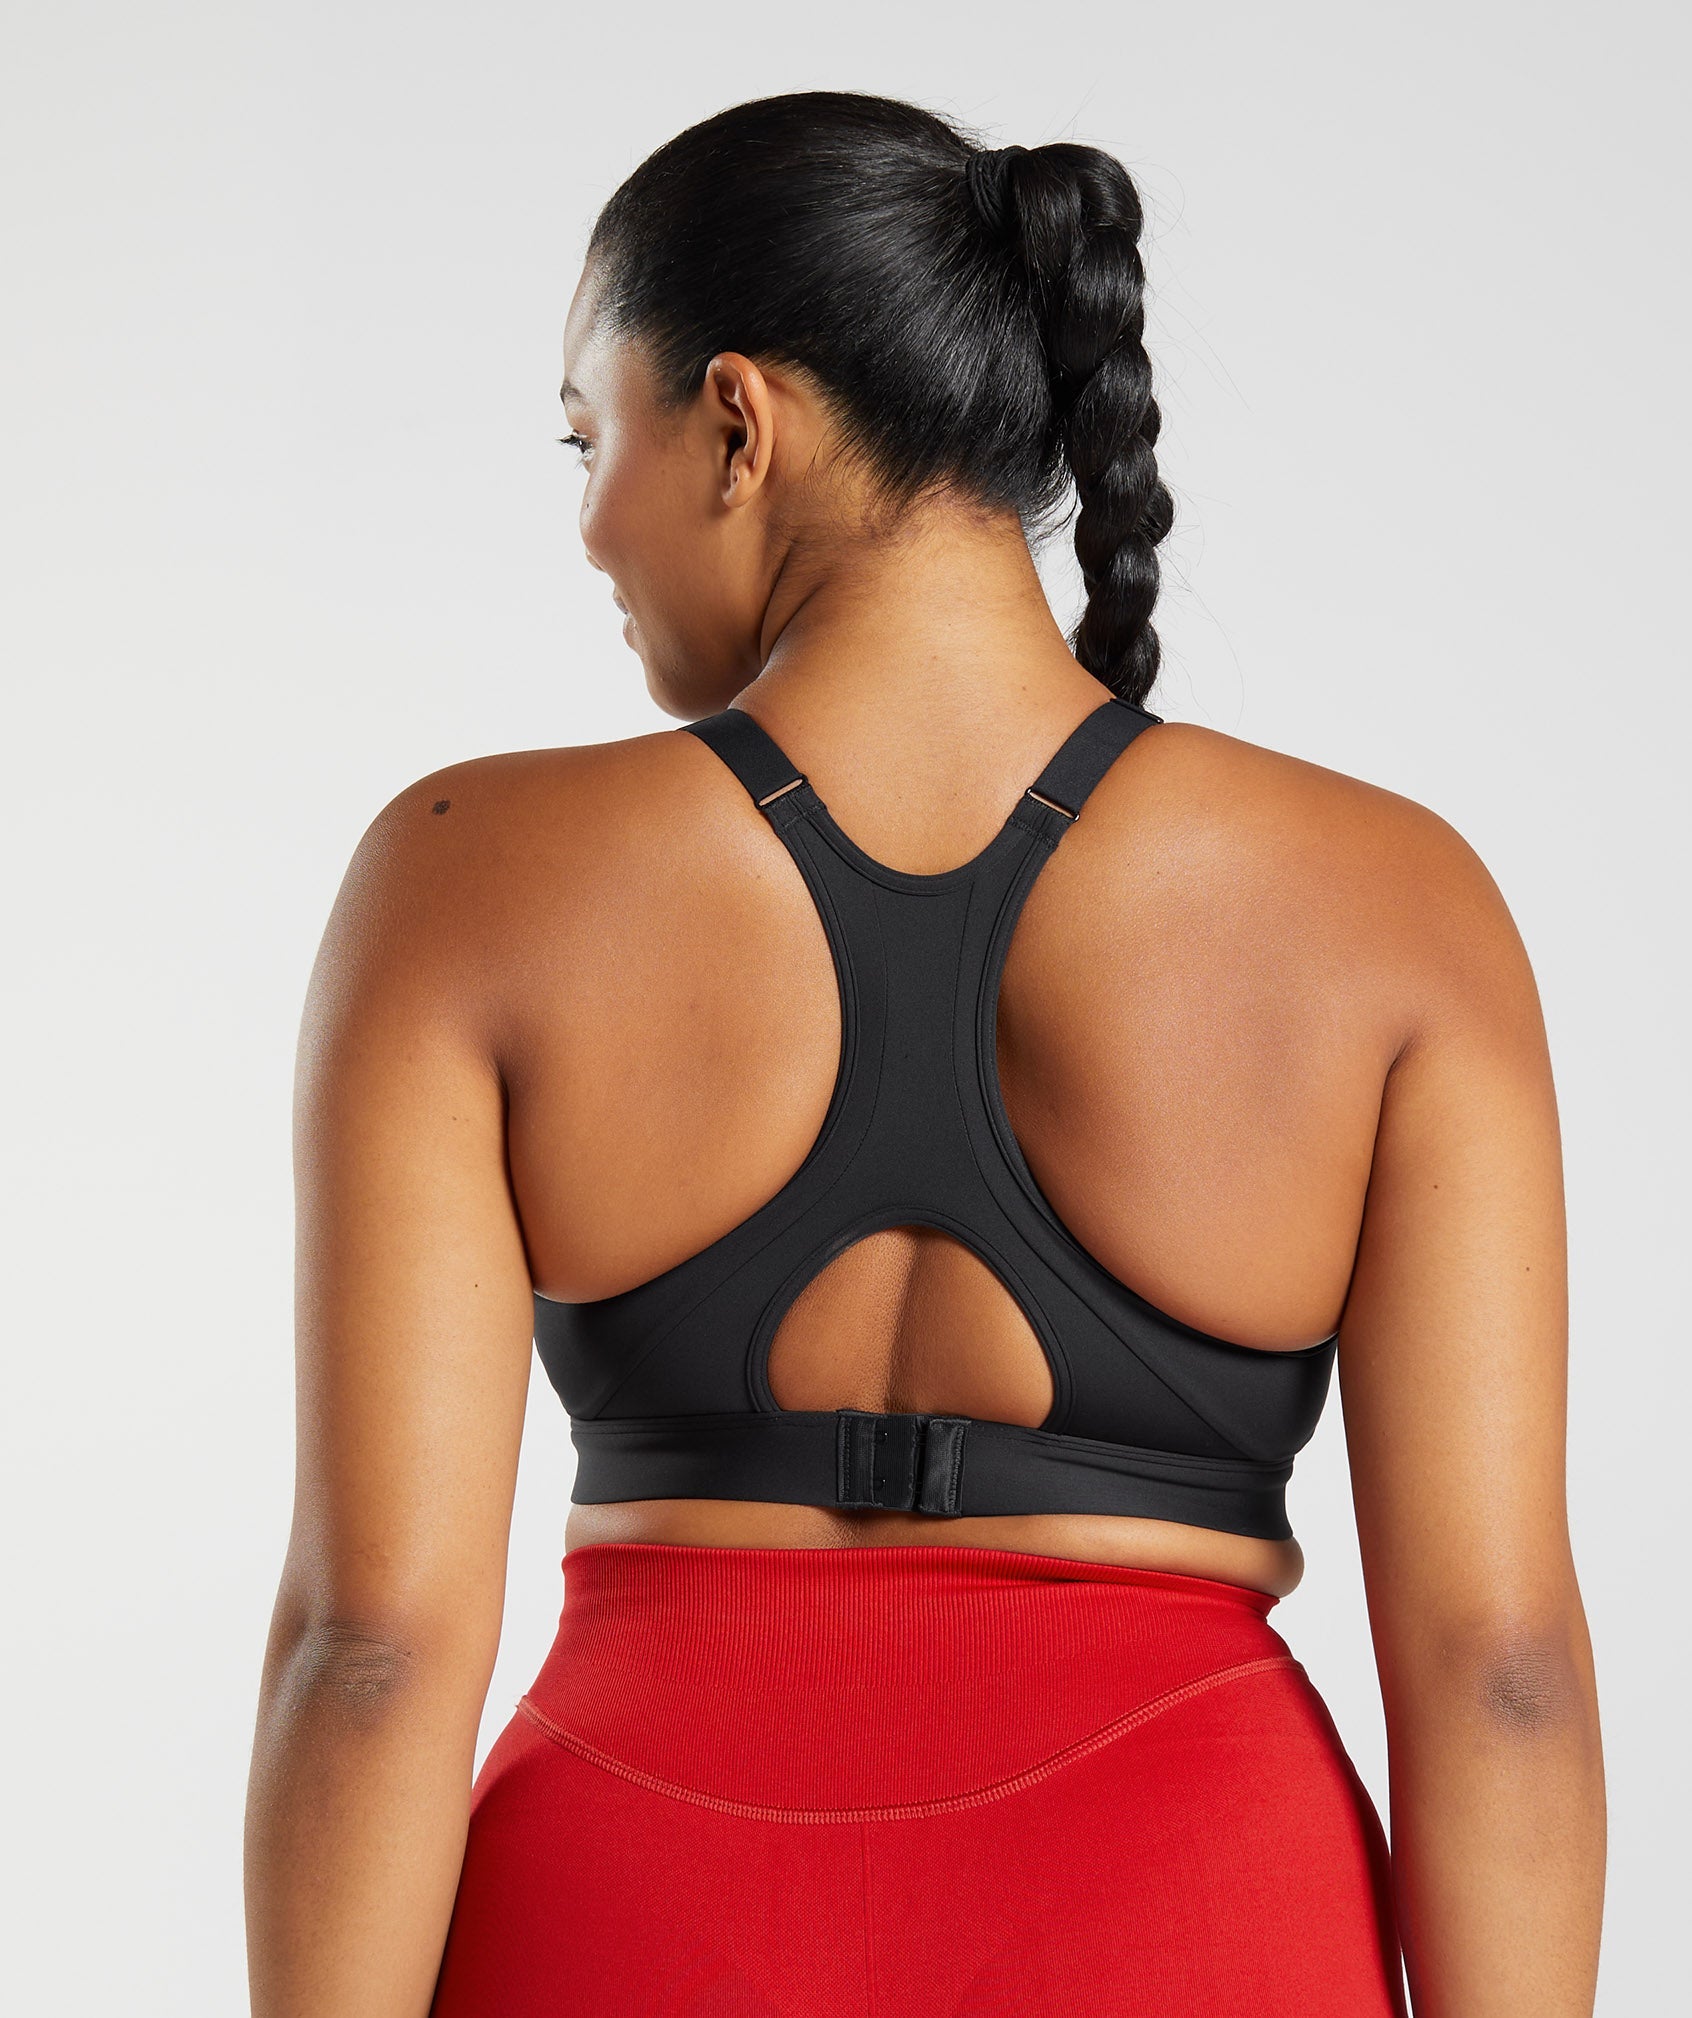 BEST HIGH IMPACT SPORTS BRAS 2022- TRY AND COMPARE GYMSHARK, SHOCK